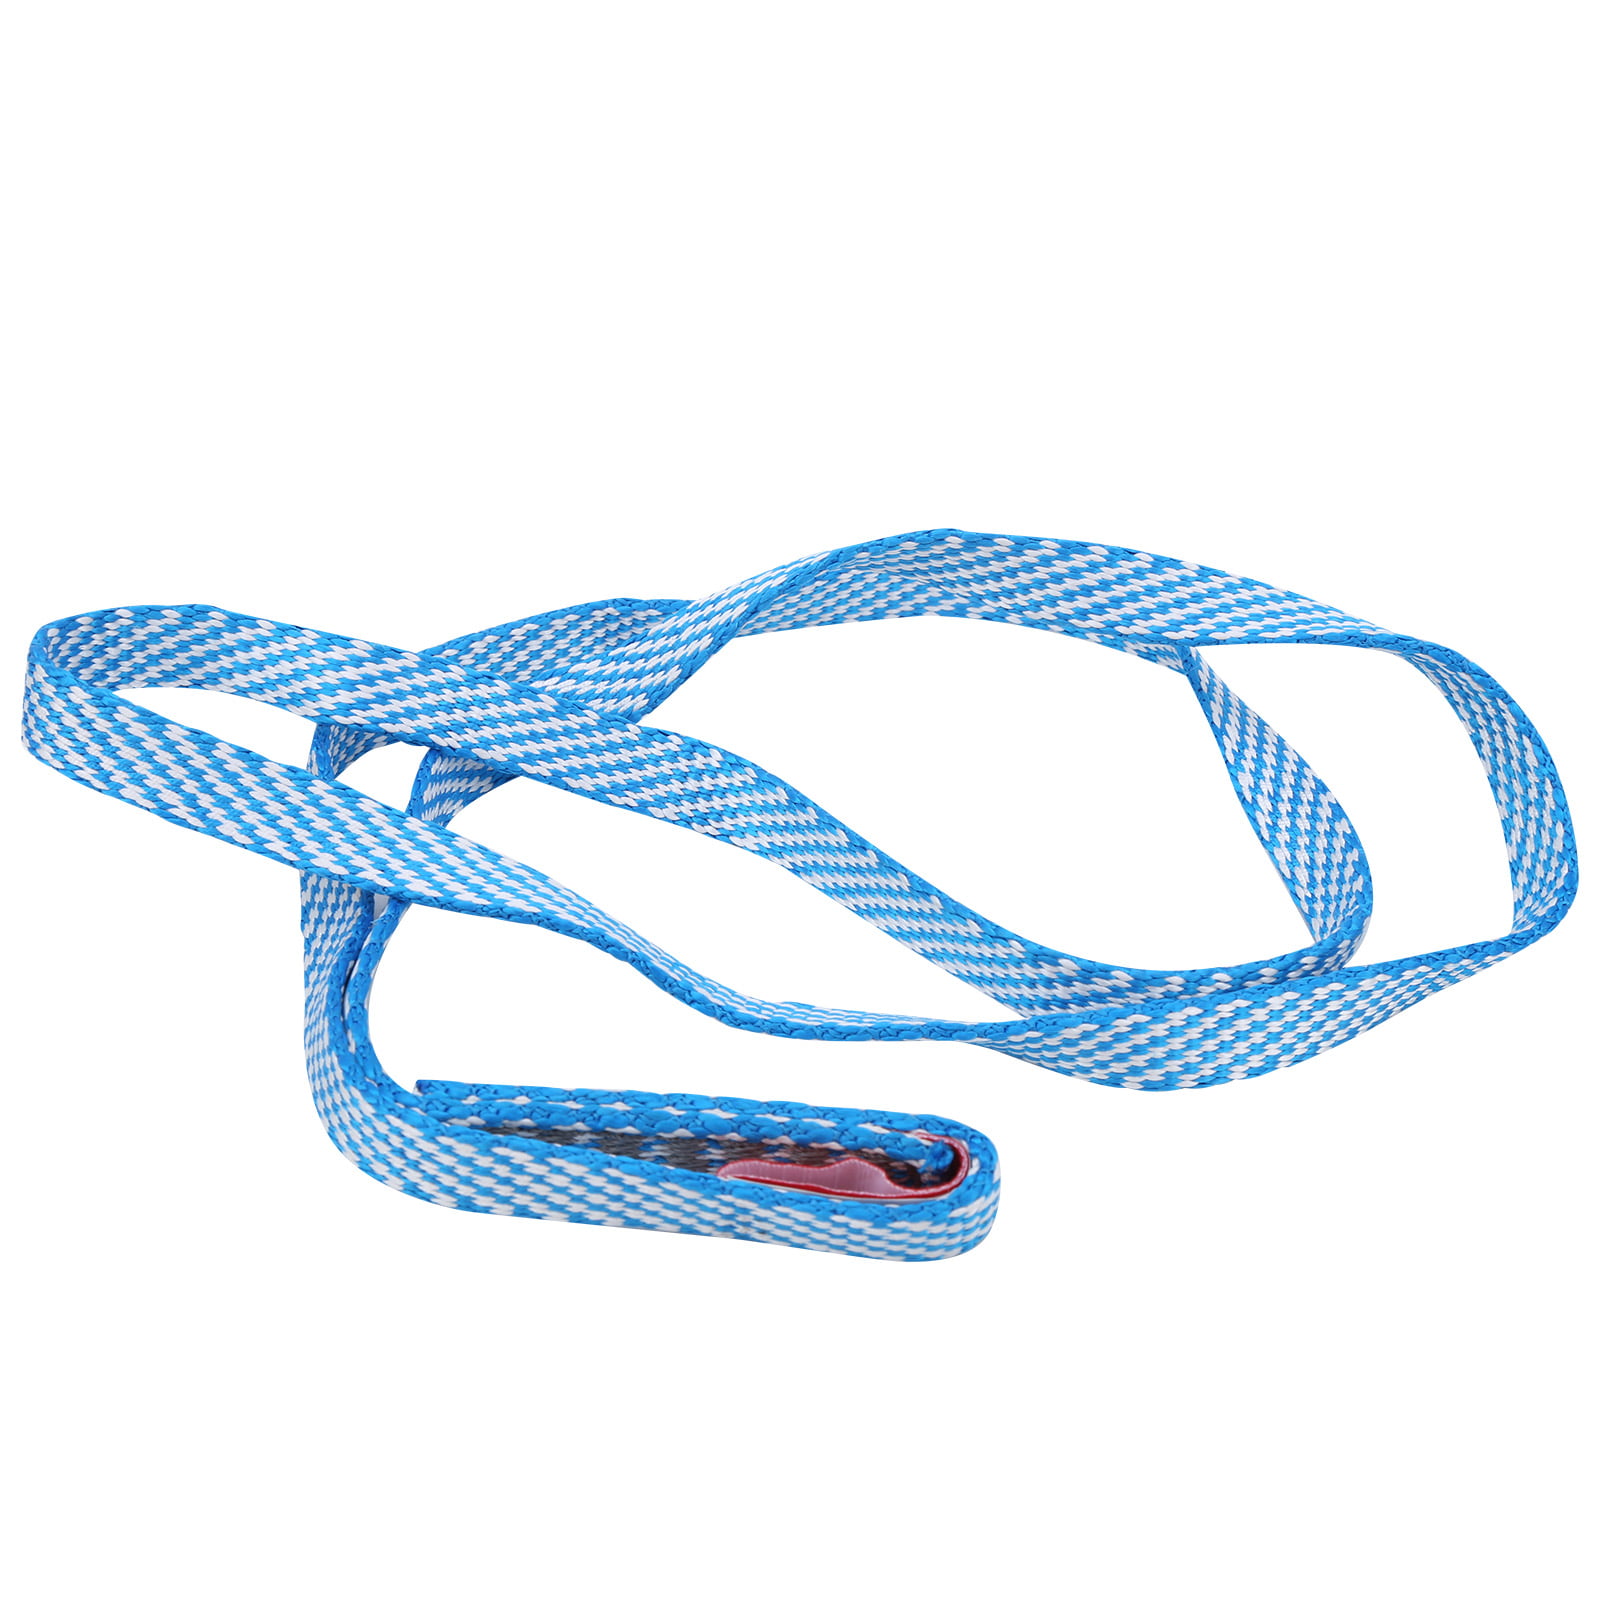 Details about   Camnal 60CM Outdoor Rock Climbing Sling Belt Belts Mountaineering Flat Rope Tool 